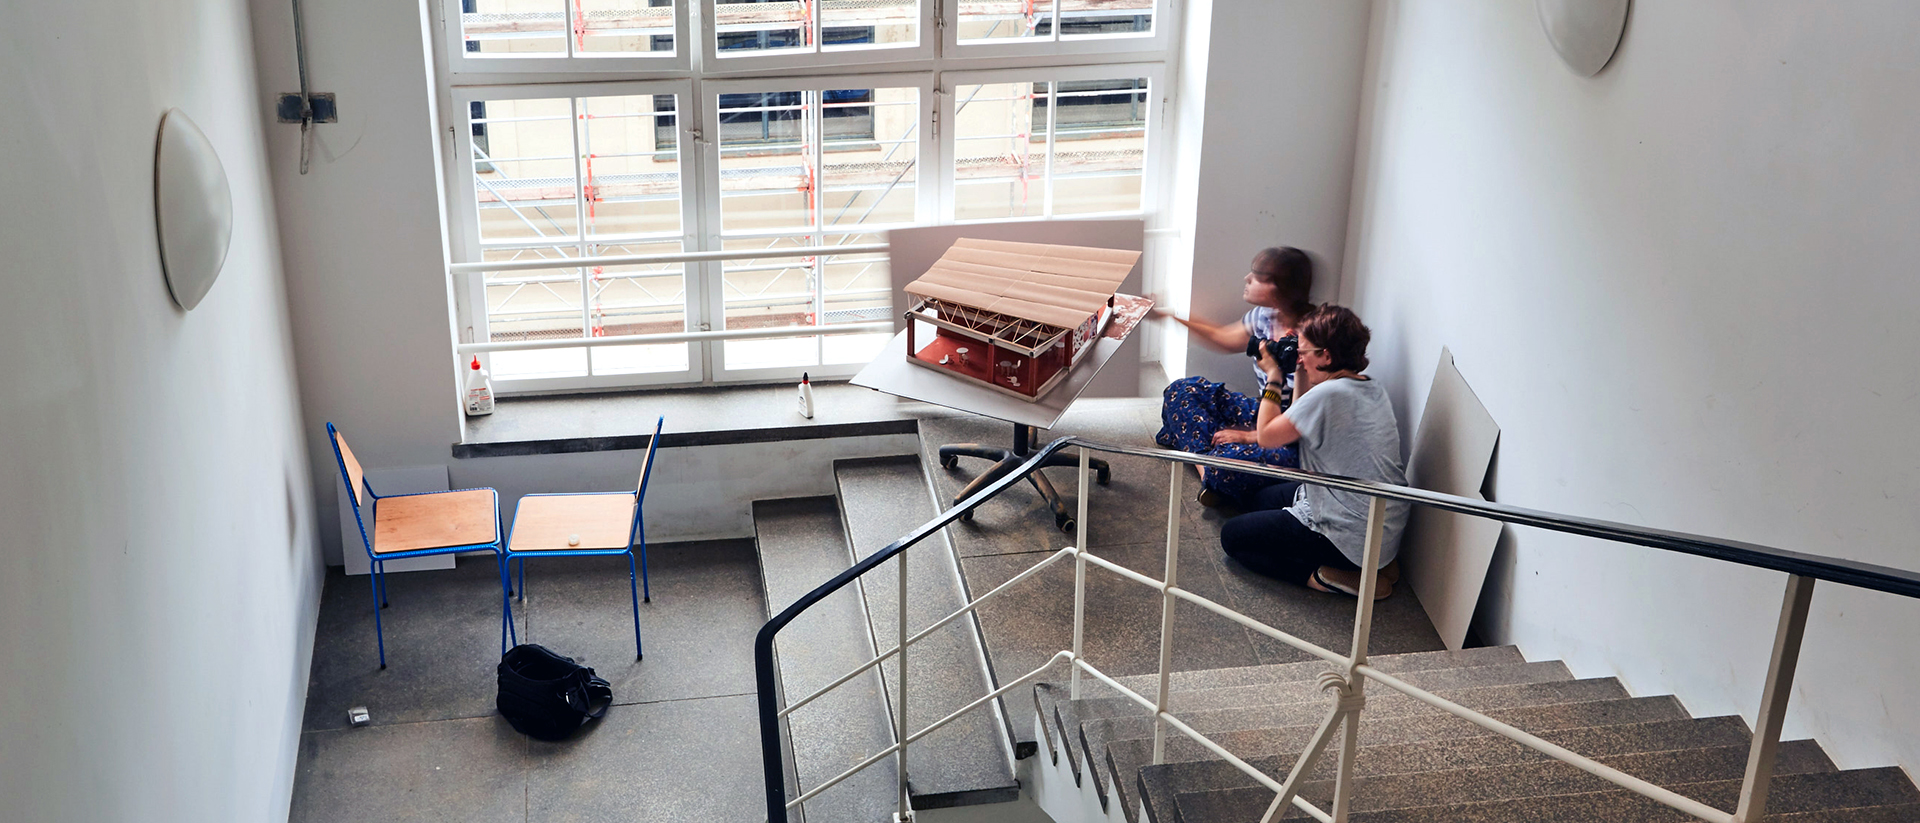 students photographing an architecture model in one of the uni's stairwells